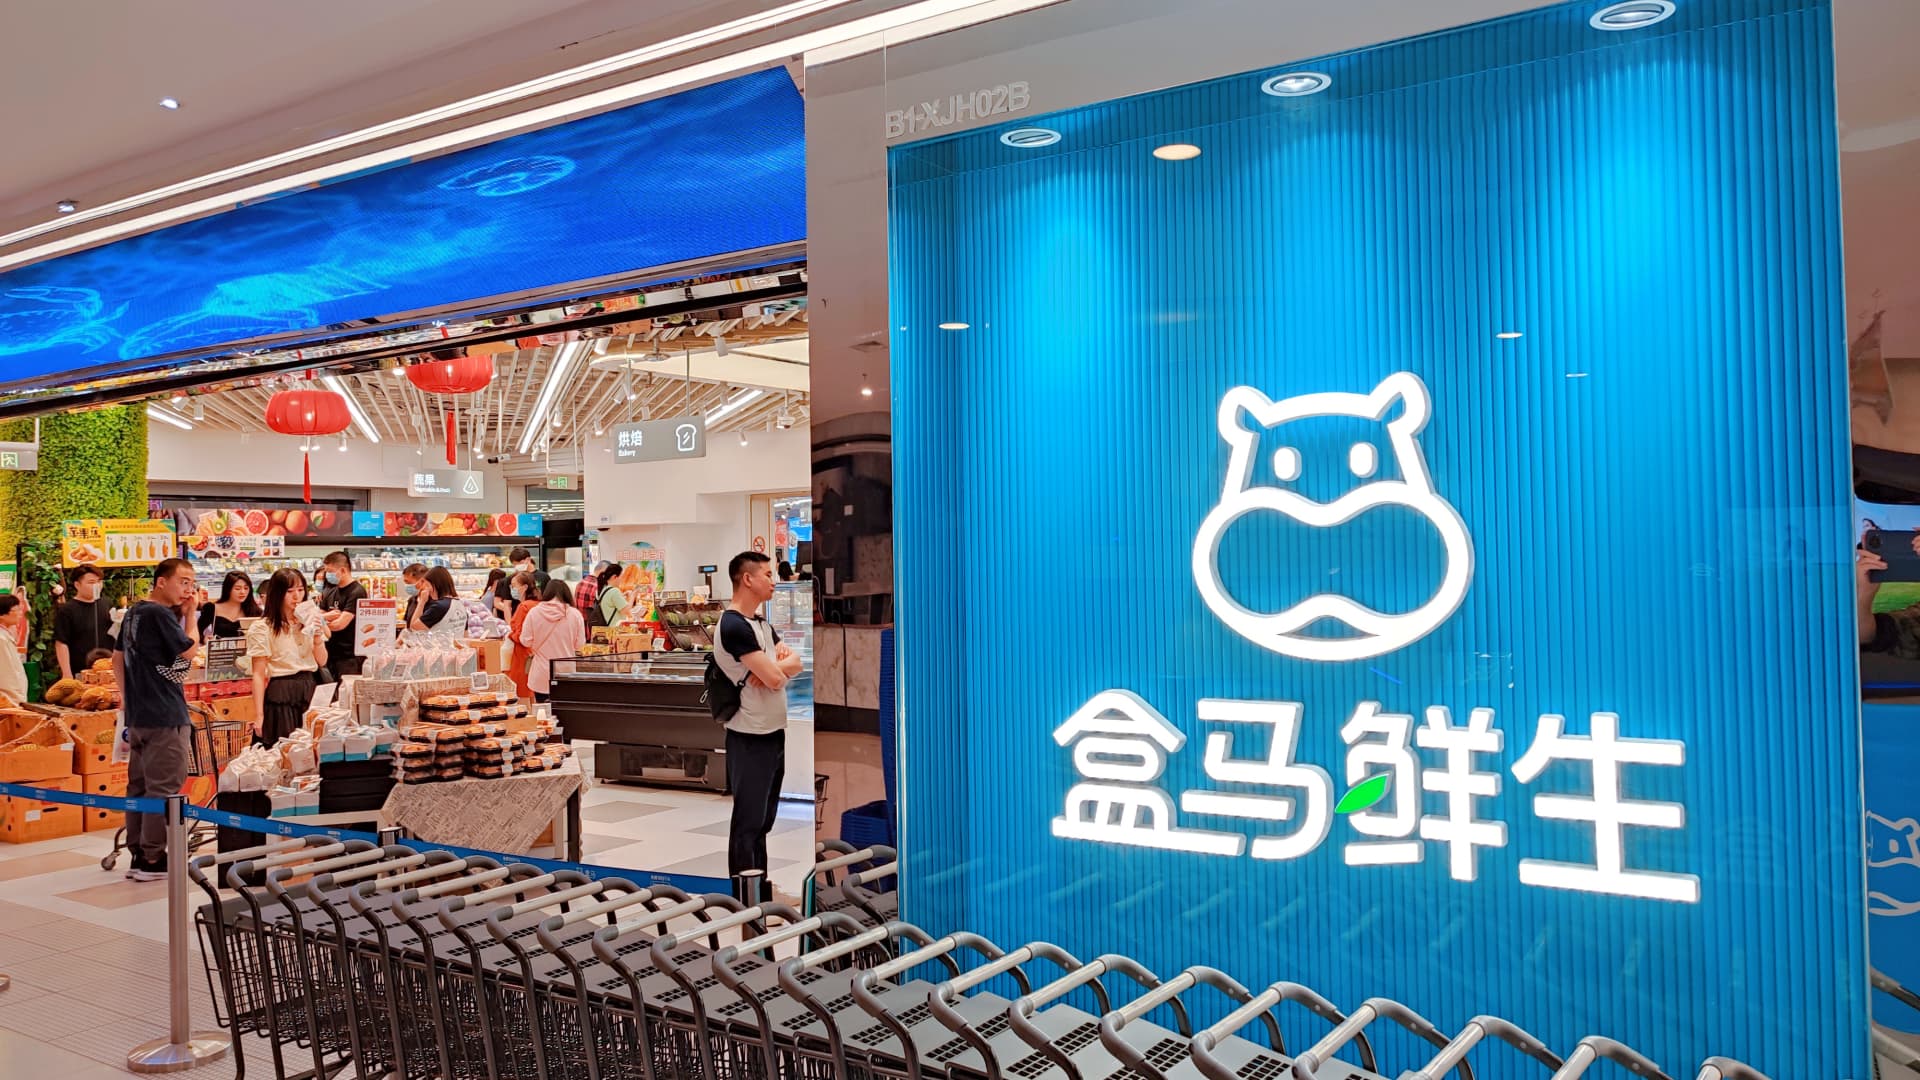 Chinese e-commerce giant Alibaba expands number of physical grocery stores ahead of the unit’s IPO